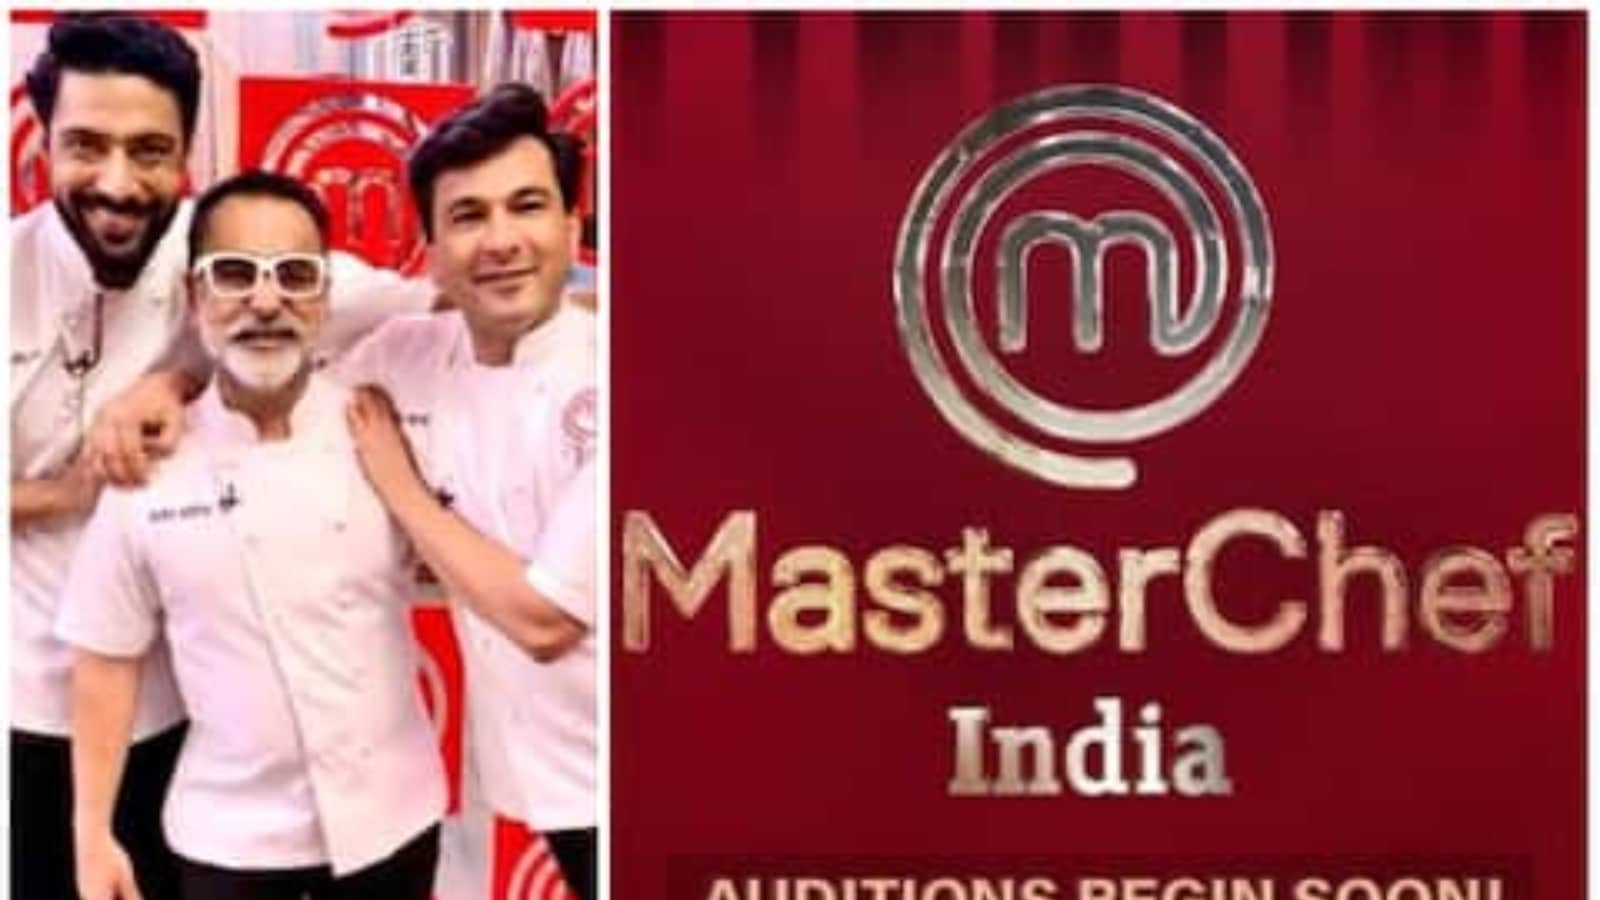 MasterChef India Season 7 Auditions to Begin on This Date in Kolkata